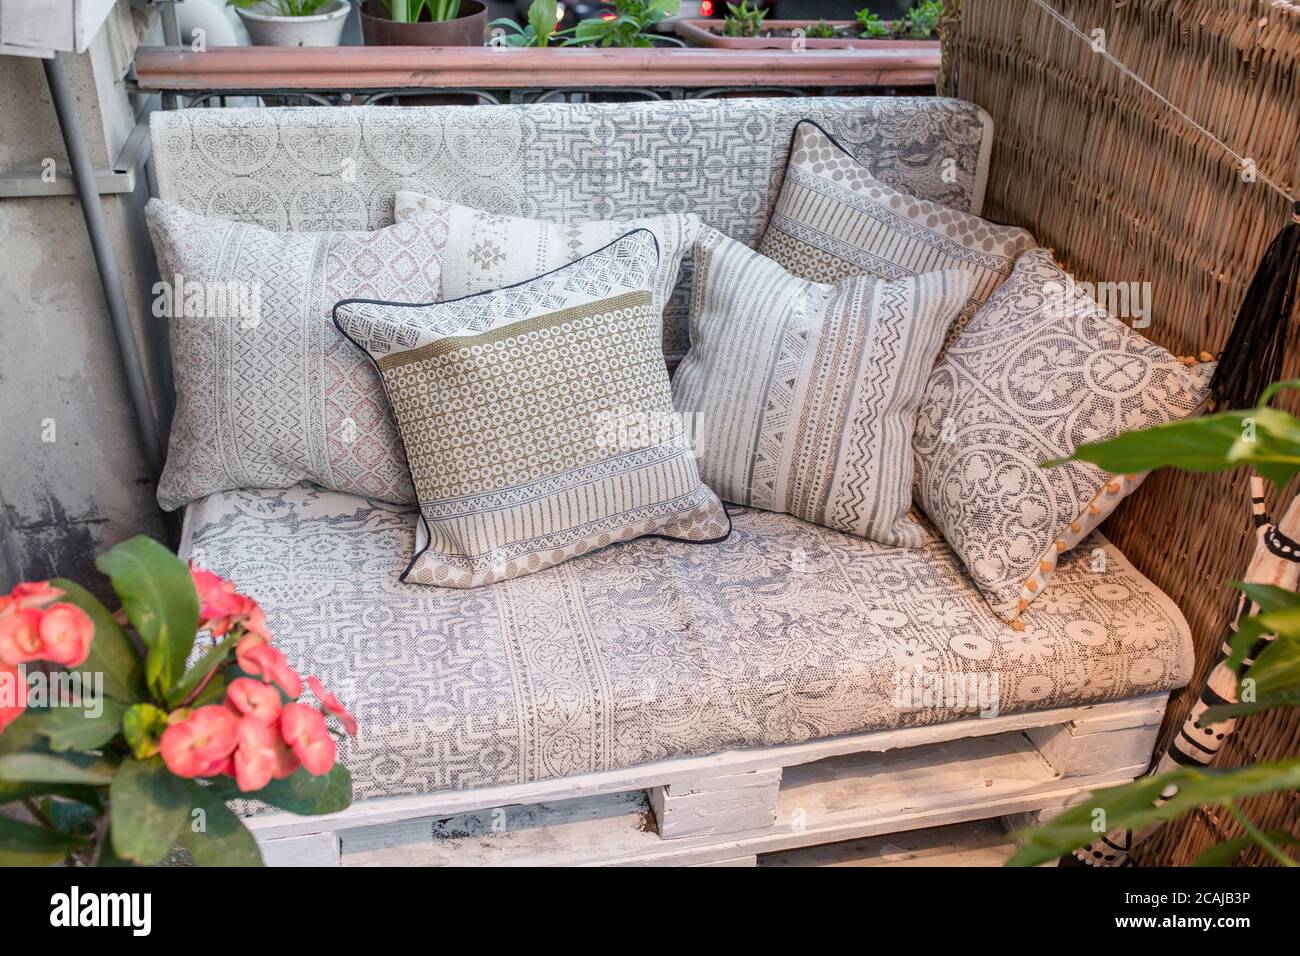 https://c8.alamy.com/comp/2CAJB3P/comfy-couch-with-pillows-surrounded-by-houseplants-2CAJB3P.jpg